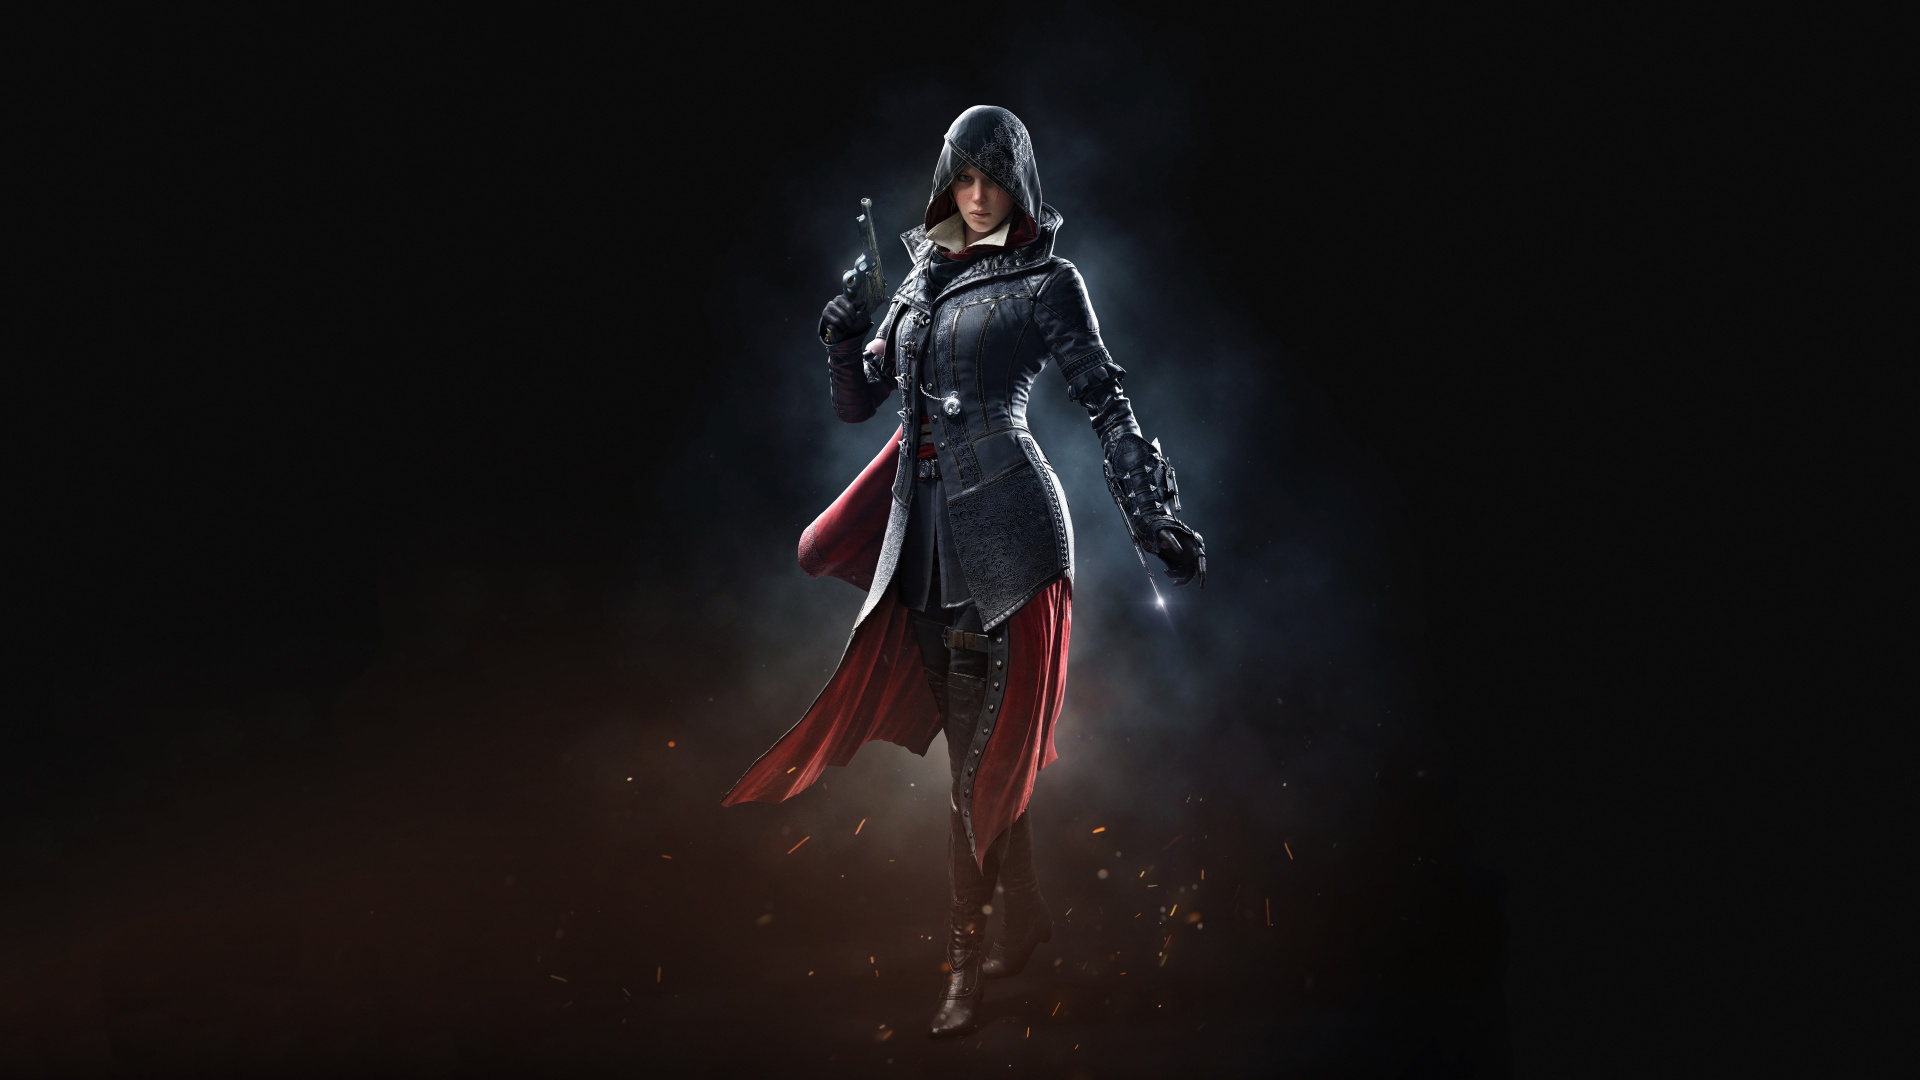 Assassins Creed Syndicate, Assassins Creed, Darkness, Superhero, Action Figure. Wallpaper in 1920x1080 Resolution